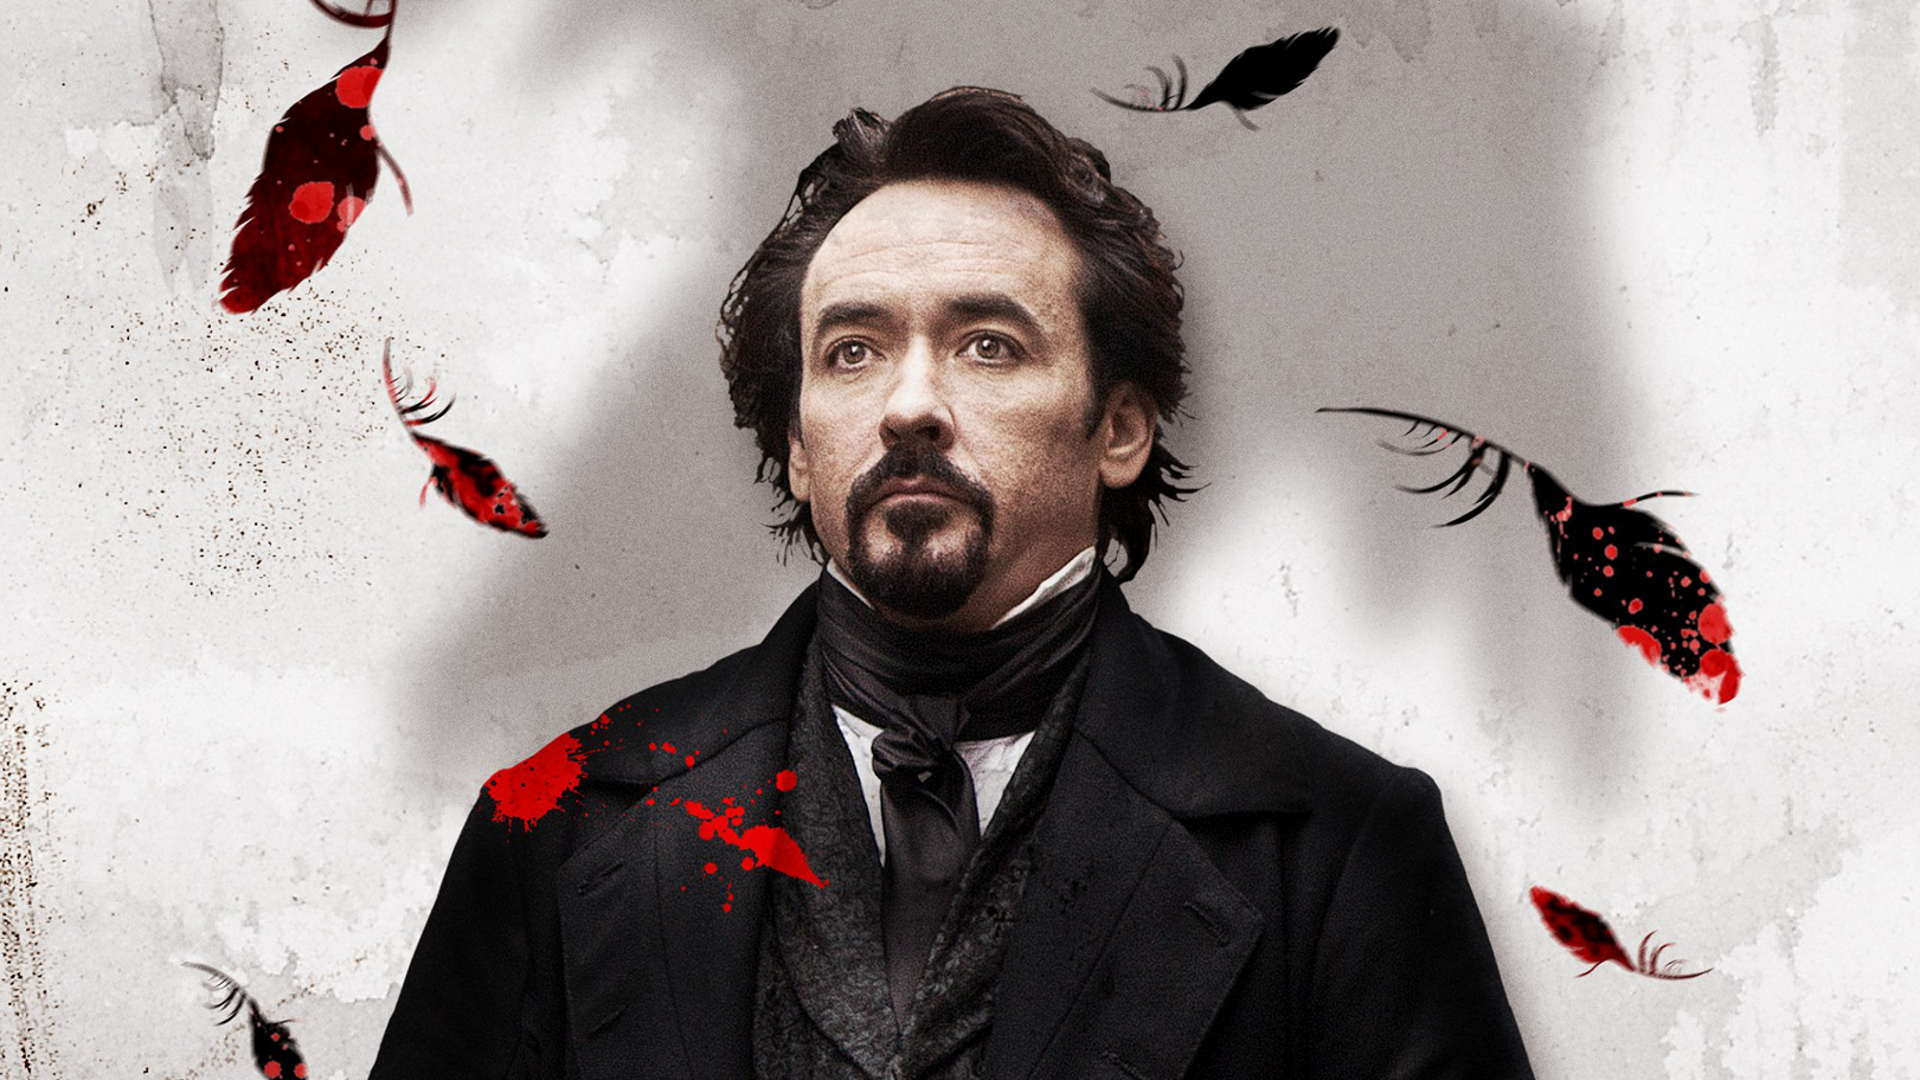 Wallpaper The Raven, John Cusack, movie, actor, celebrity, feathers